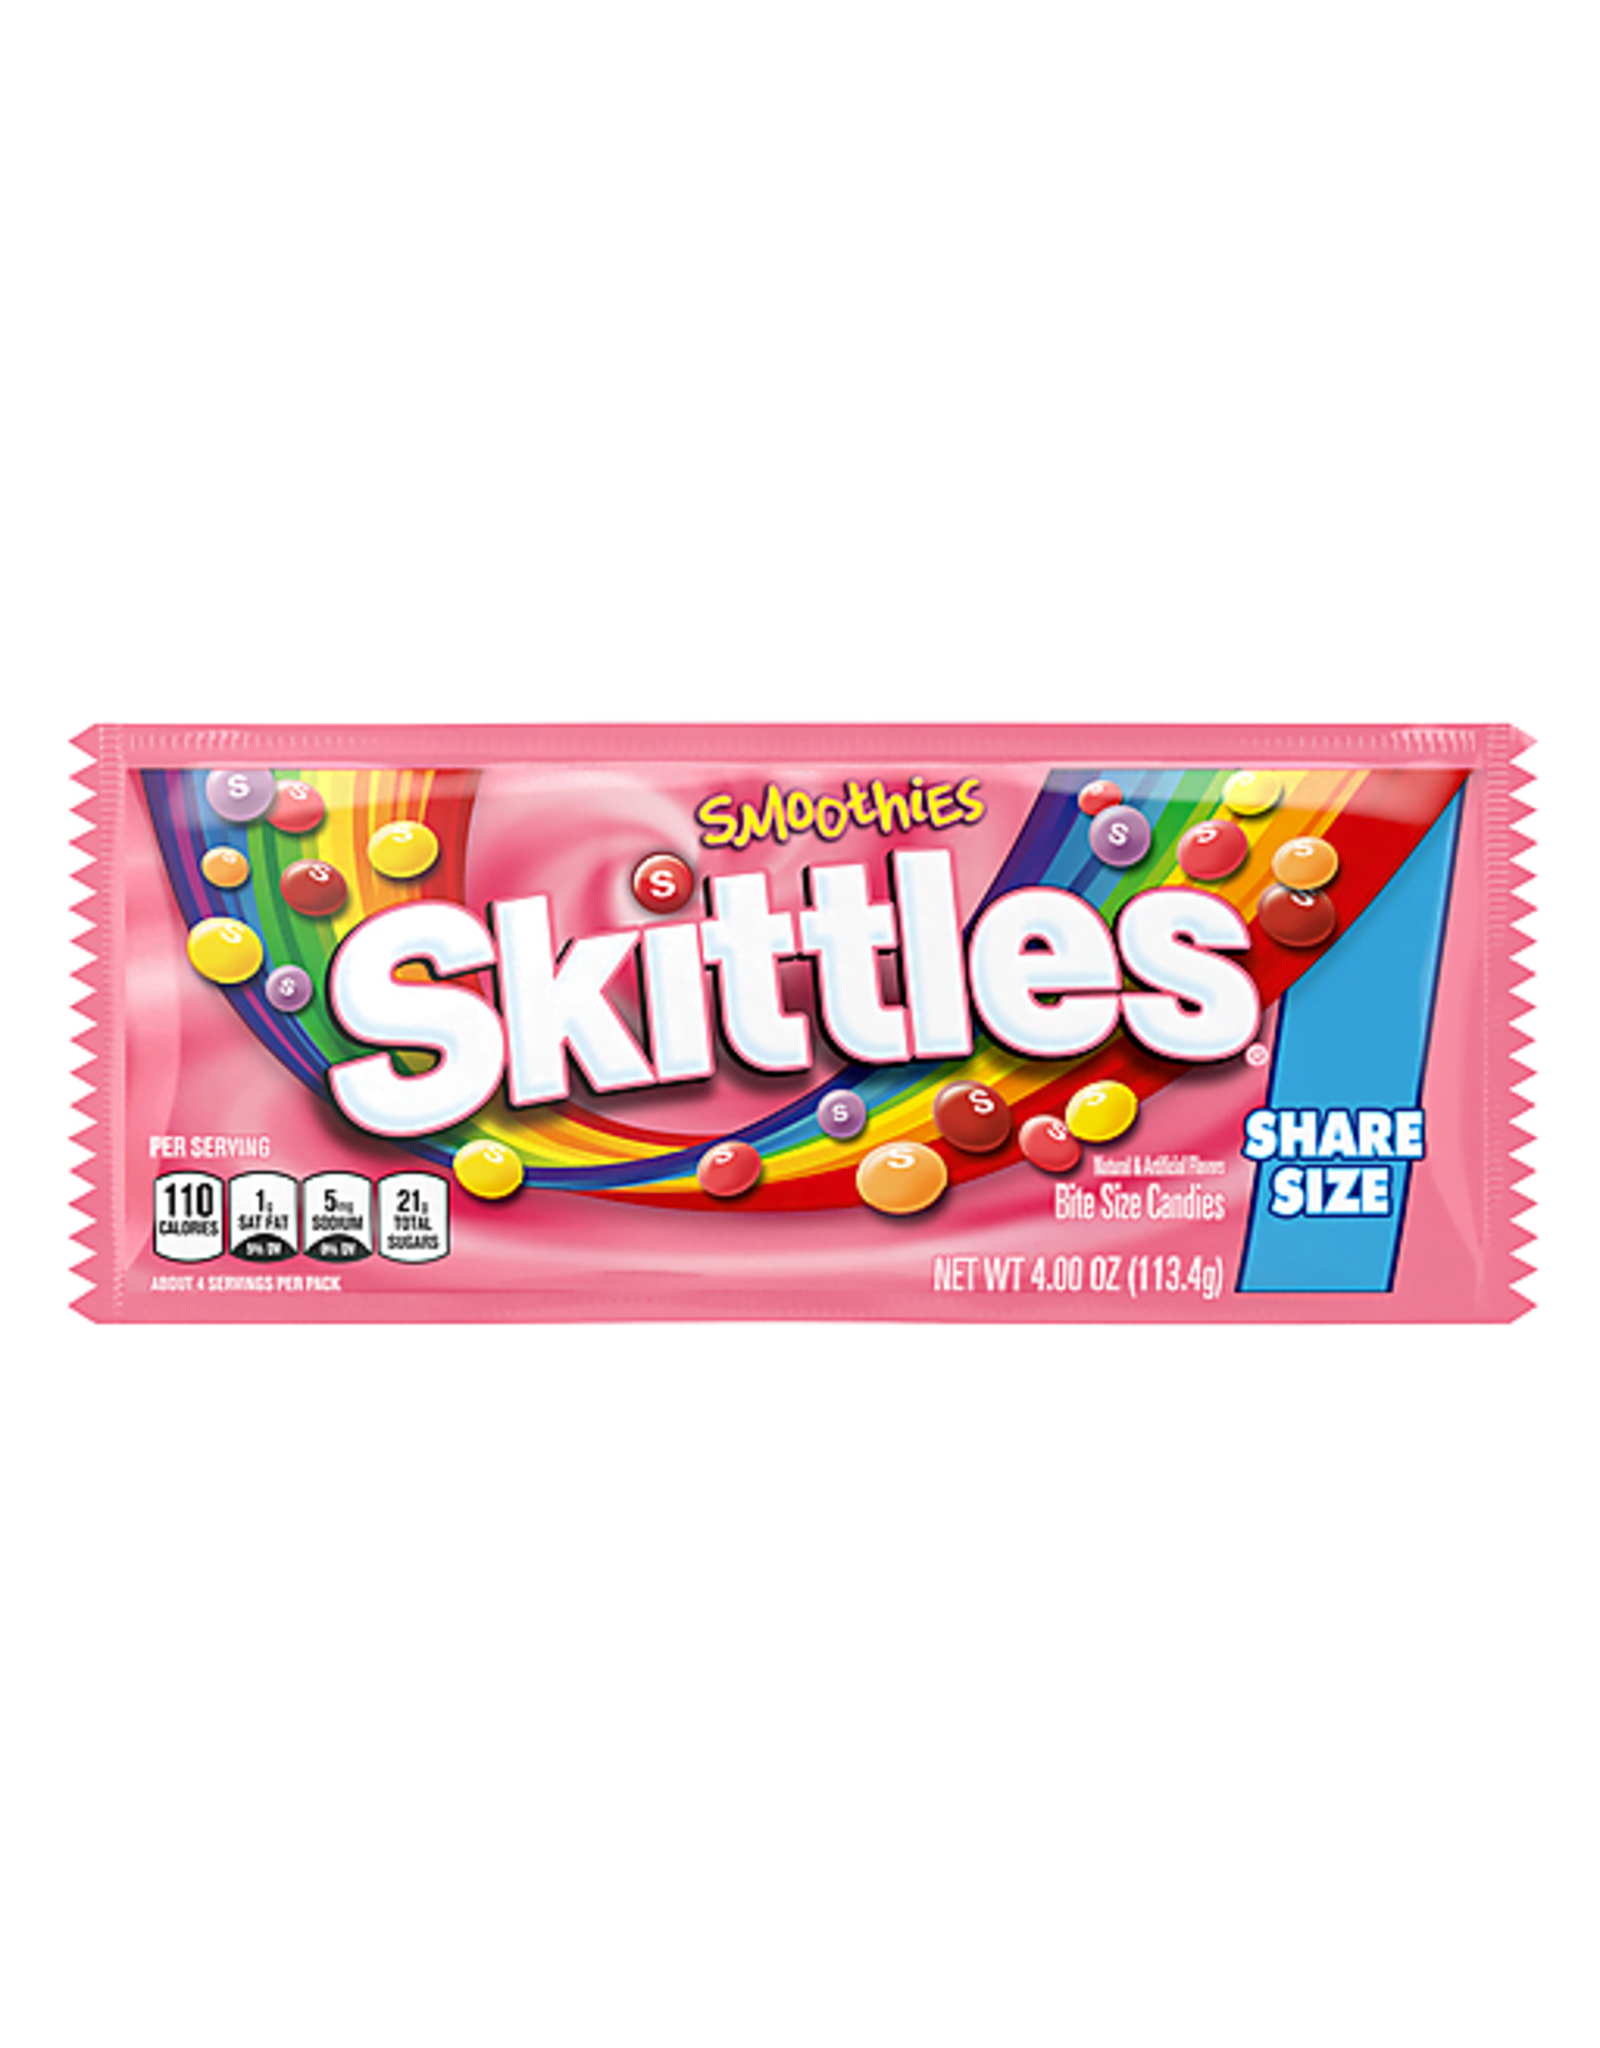 Skittles Smoothies Share Size